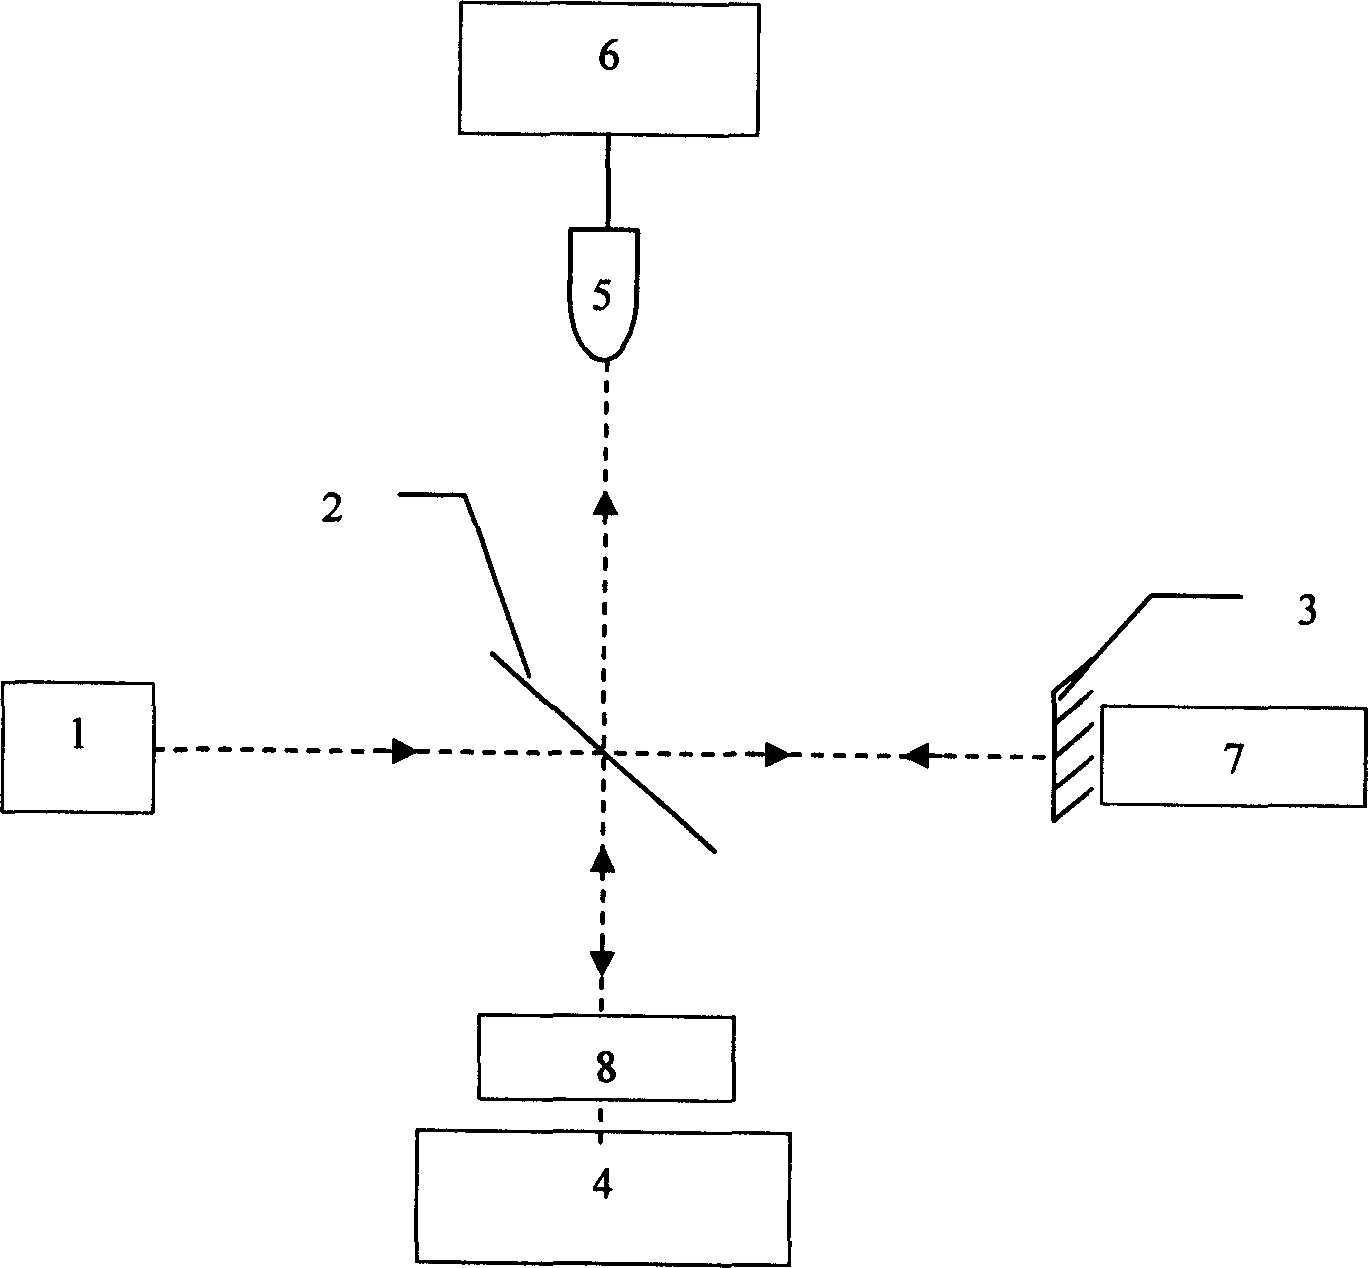 Jewel internal-structure detection method and apparatus